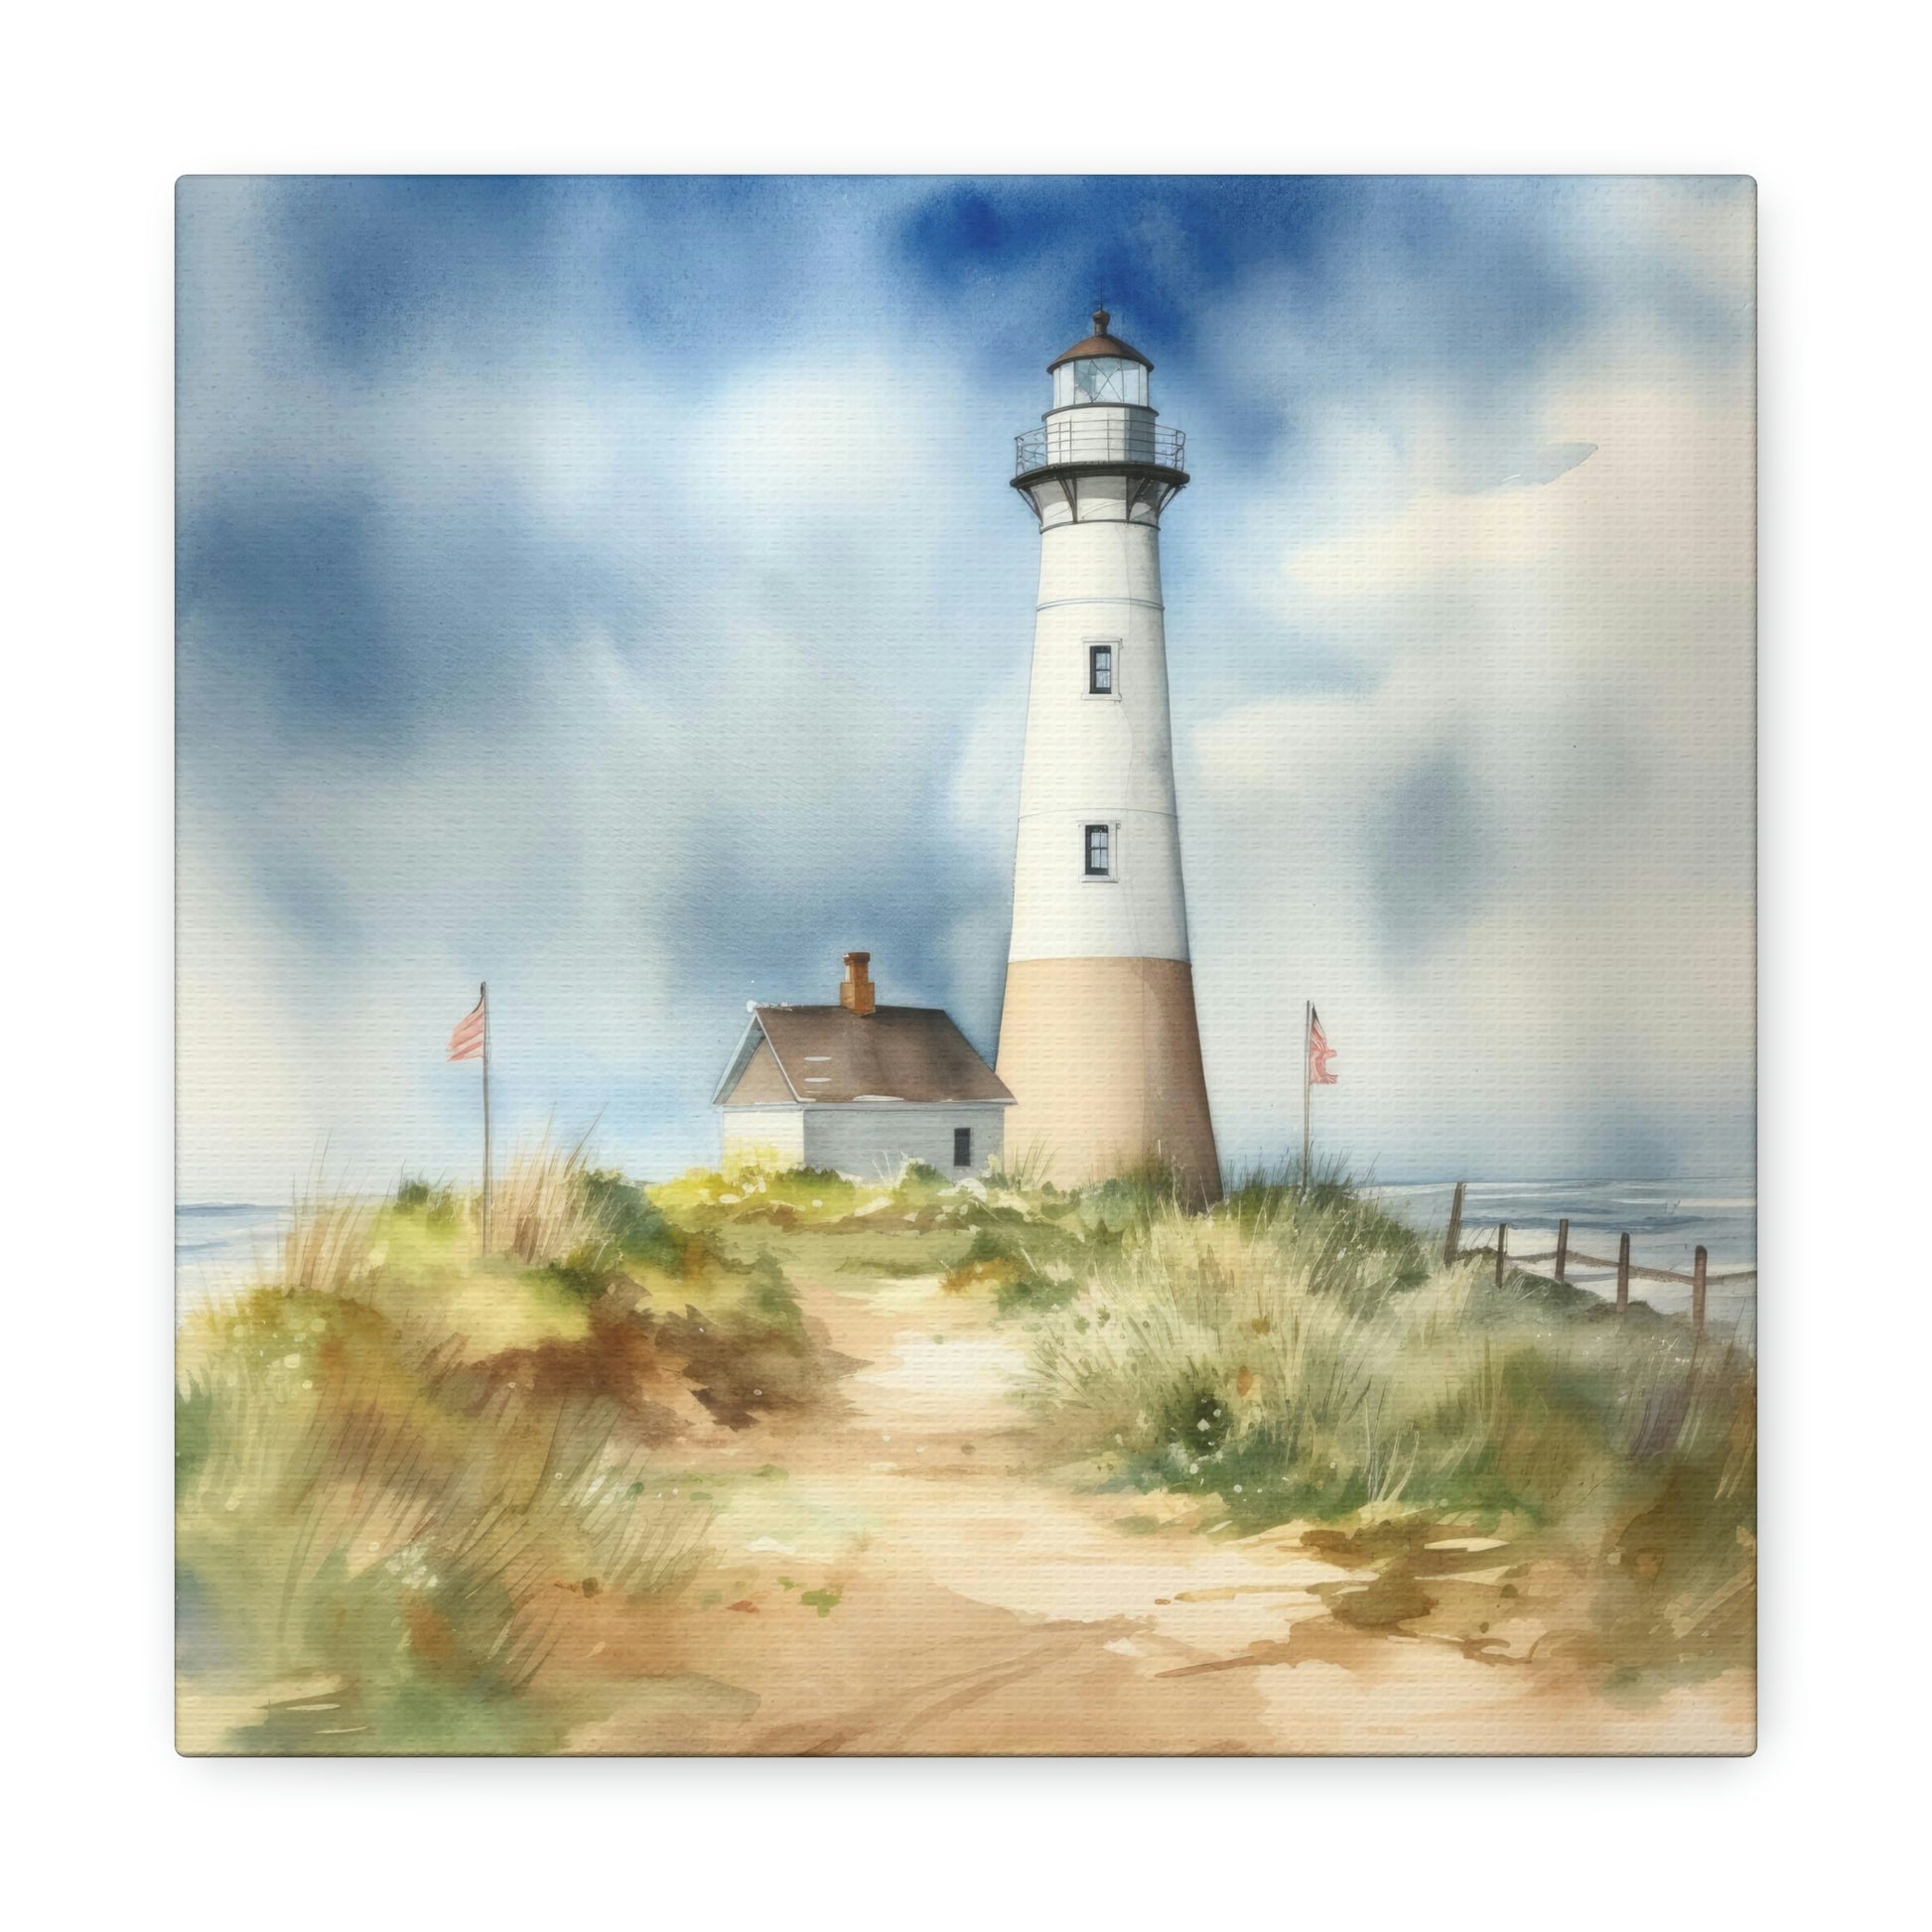 blue skies with lighthouse by the sea canvas art print, lighthouse canvas decoration for nautical theme room, canvas with lighthouse on it